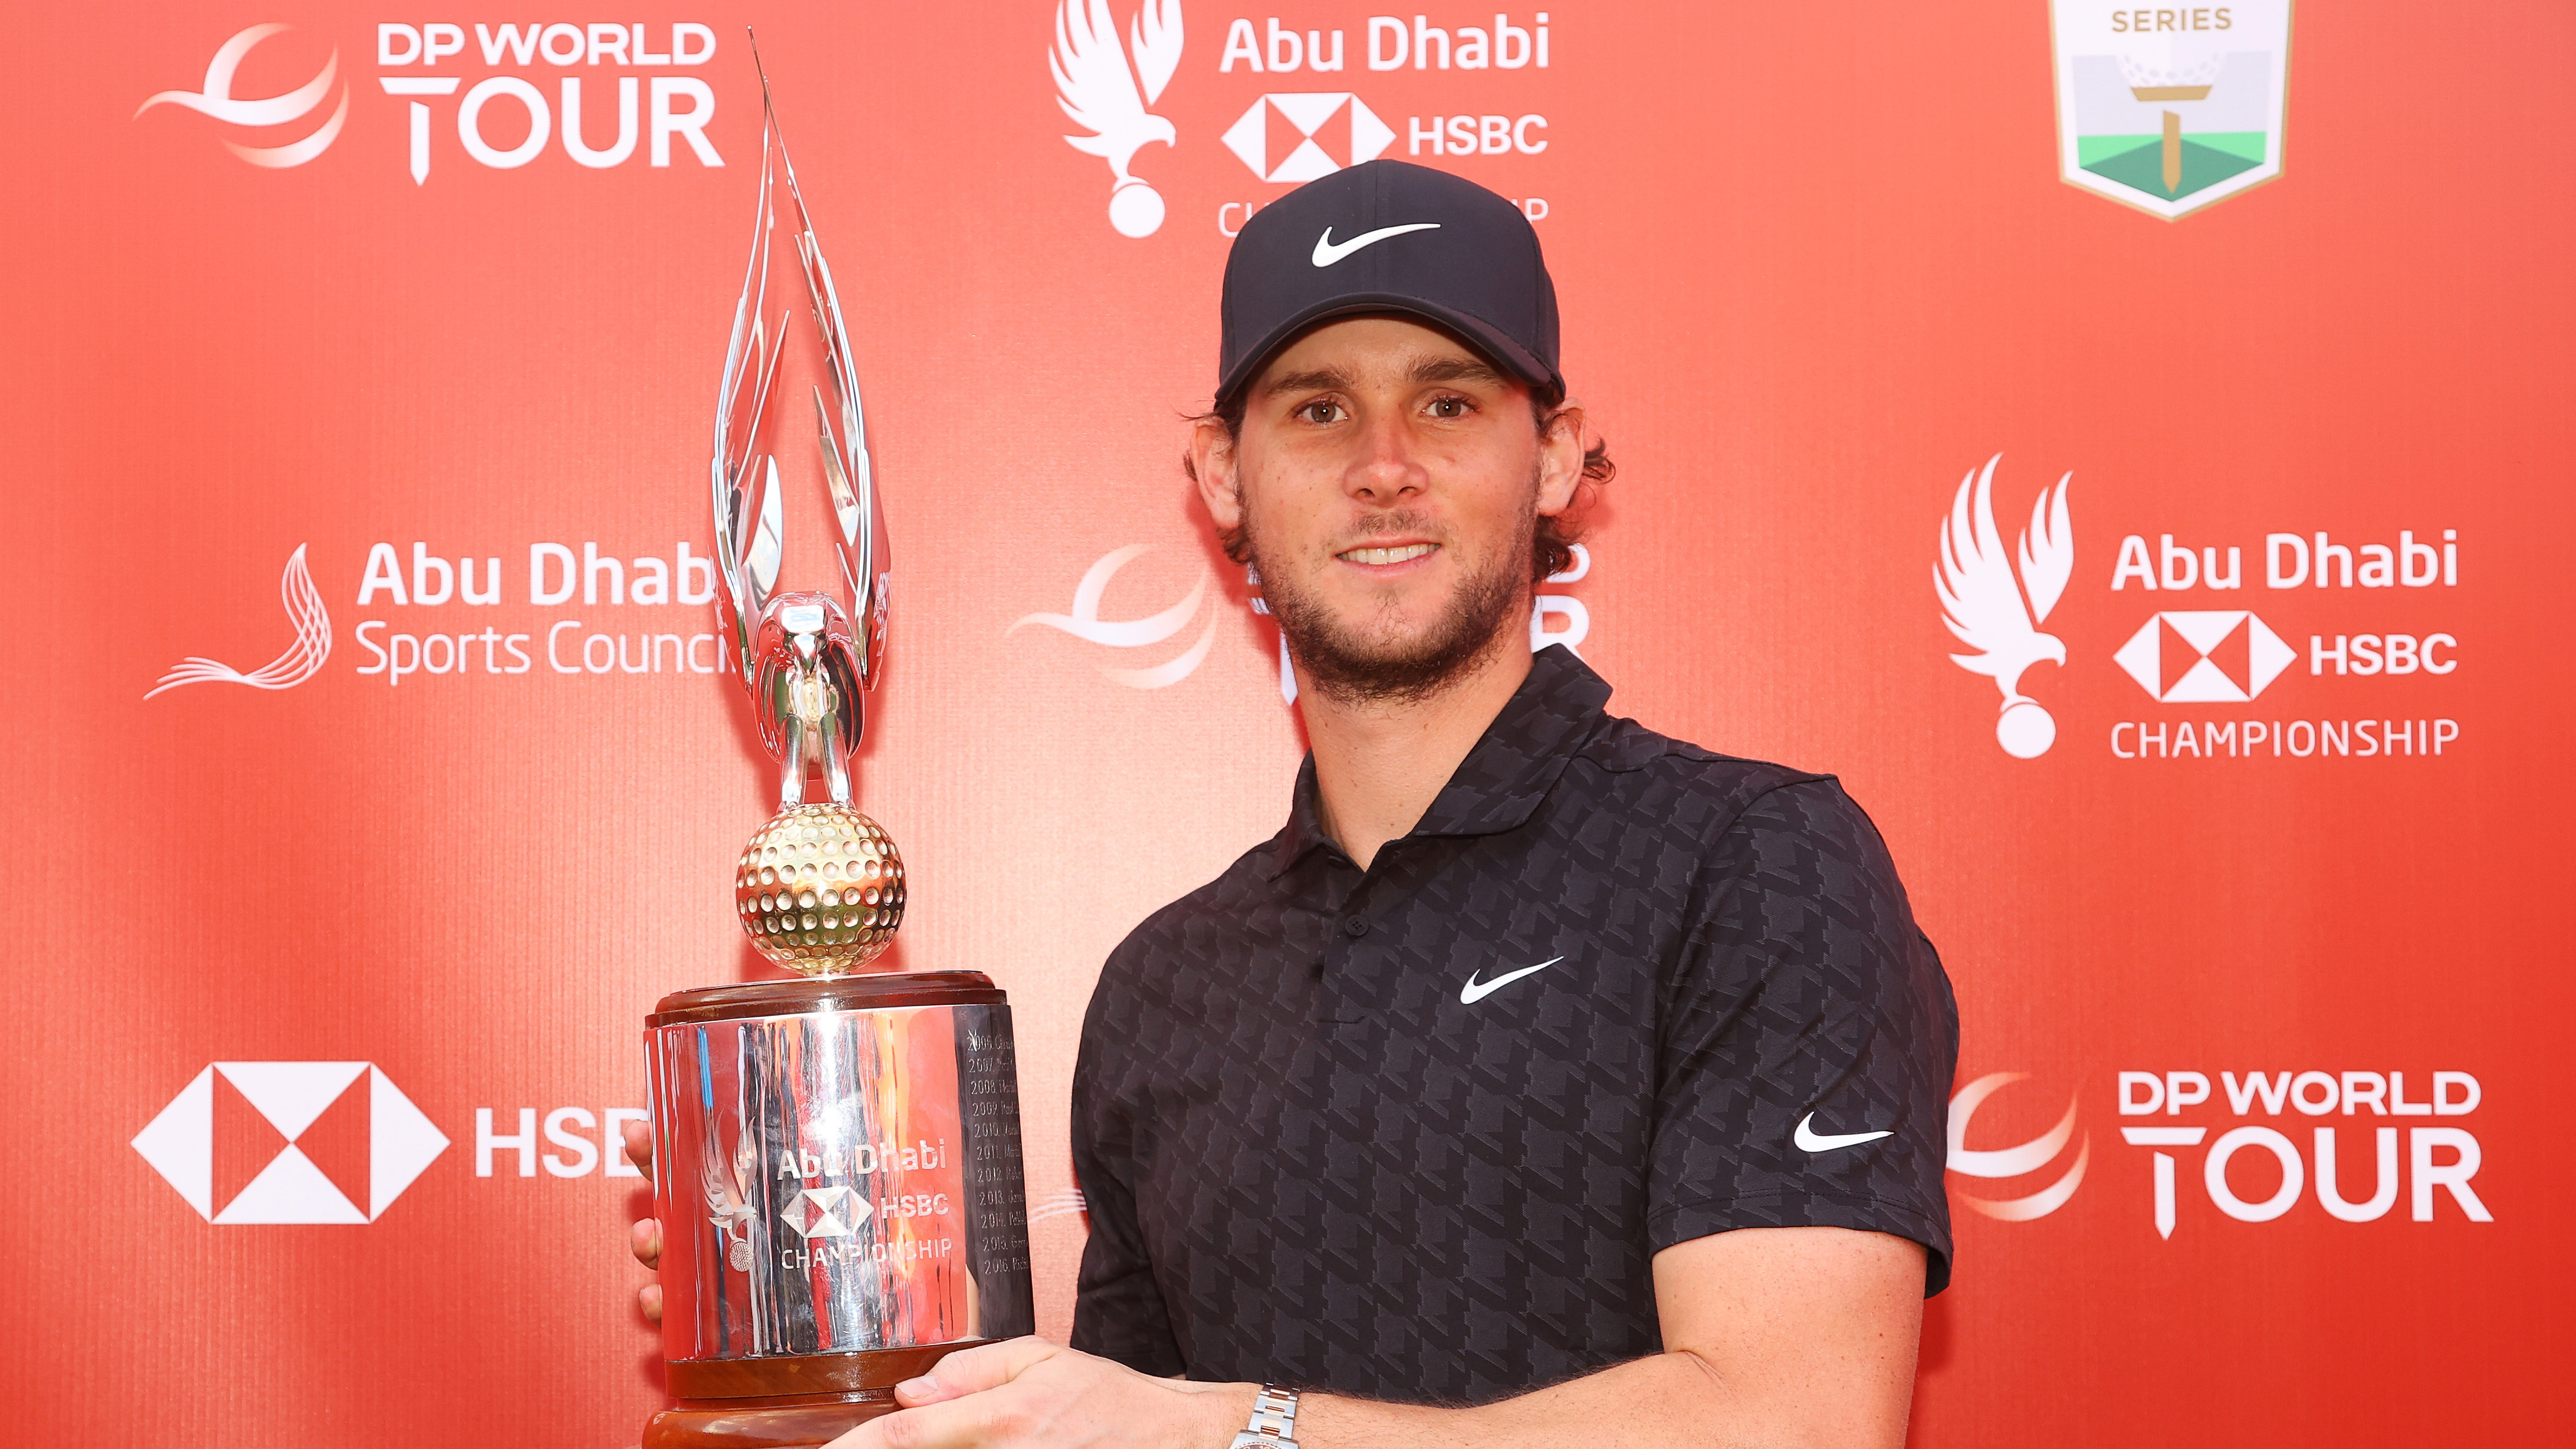 Thomas Pieters closer to long-sought success with Super 6 Perth lead